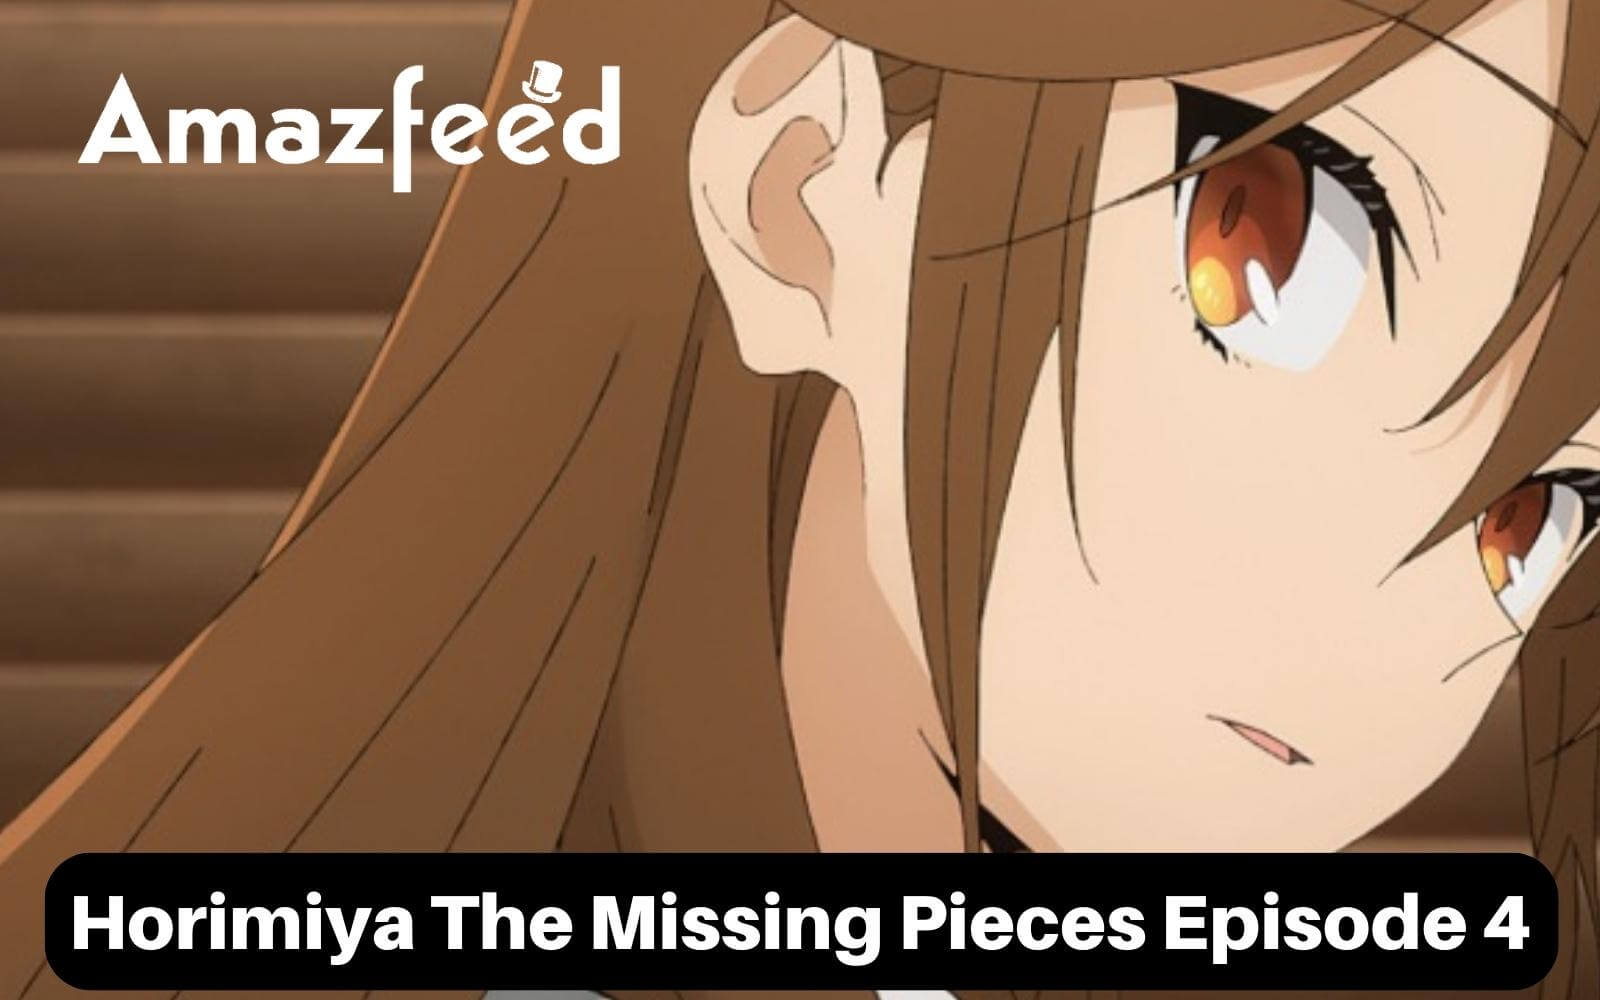 Horimiya: The Missing Pieces episode 10 - Release date, countdown